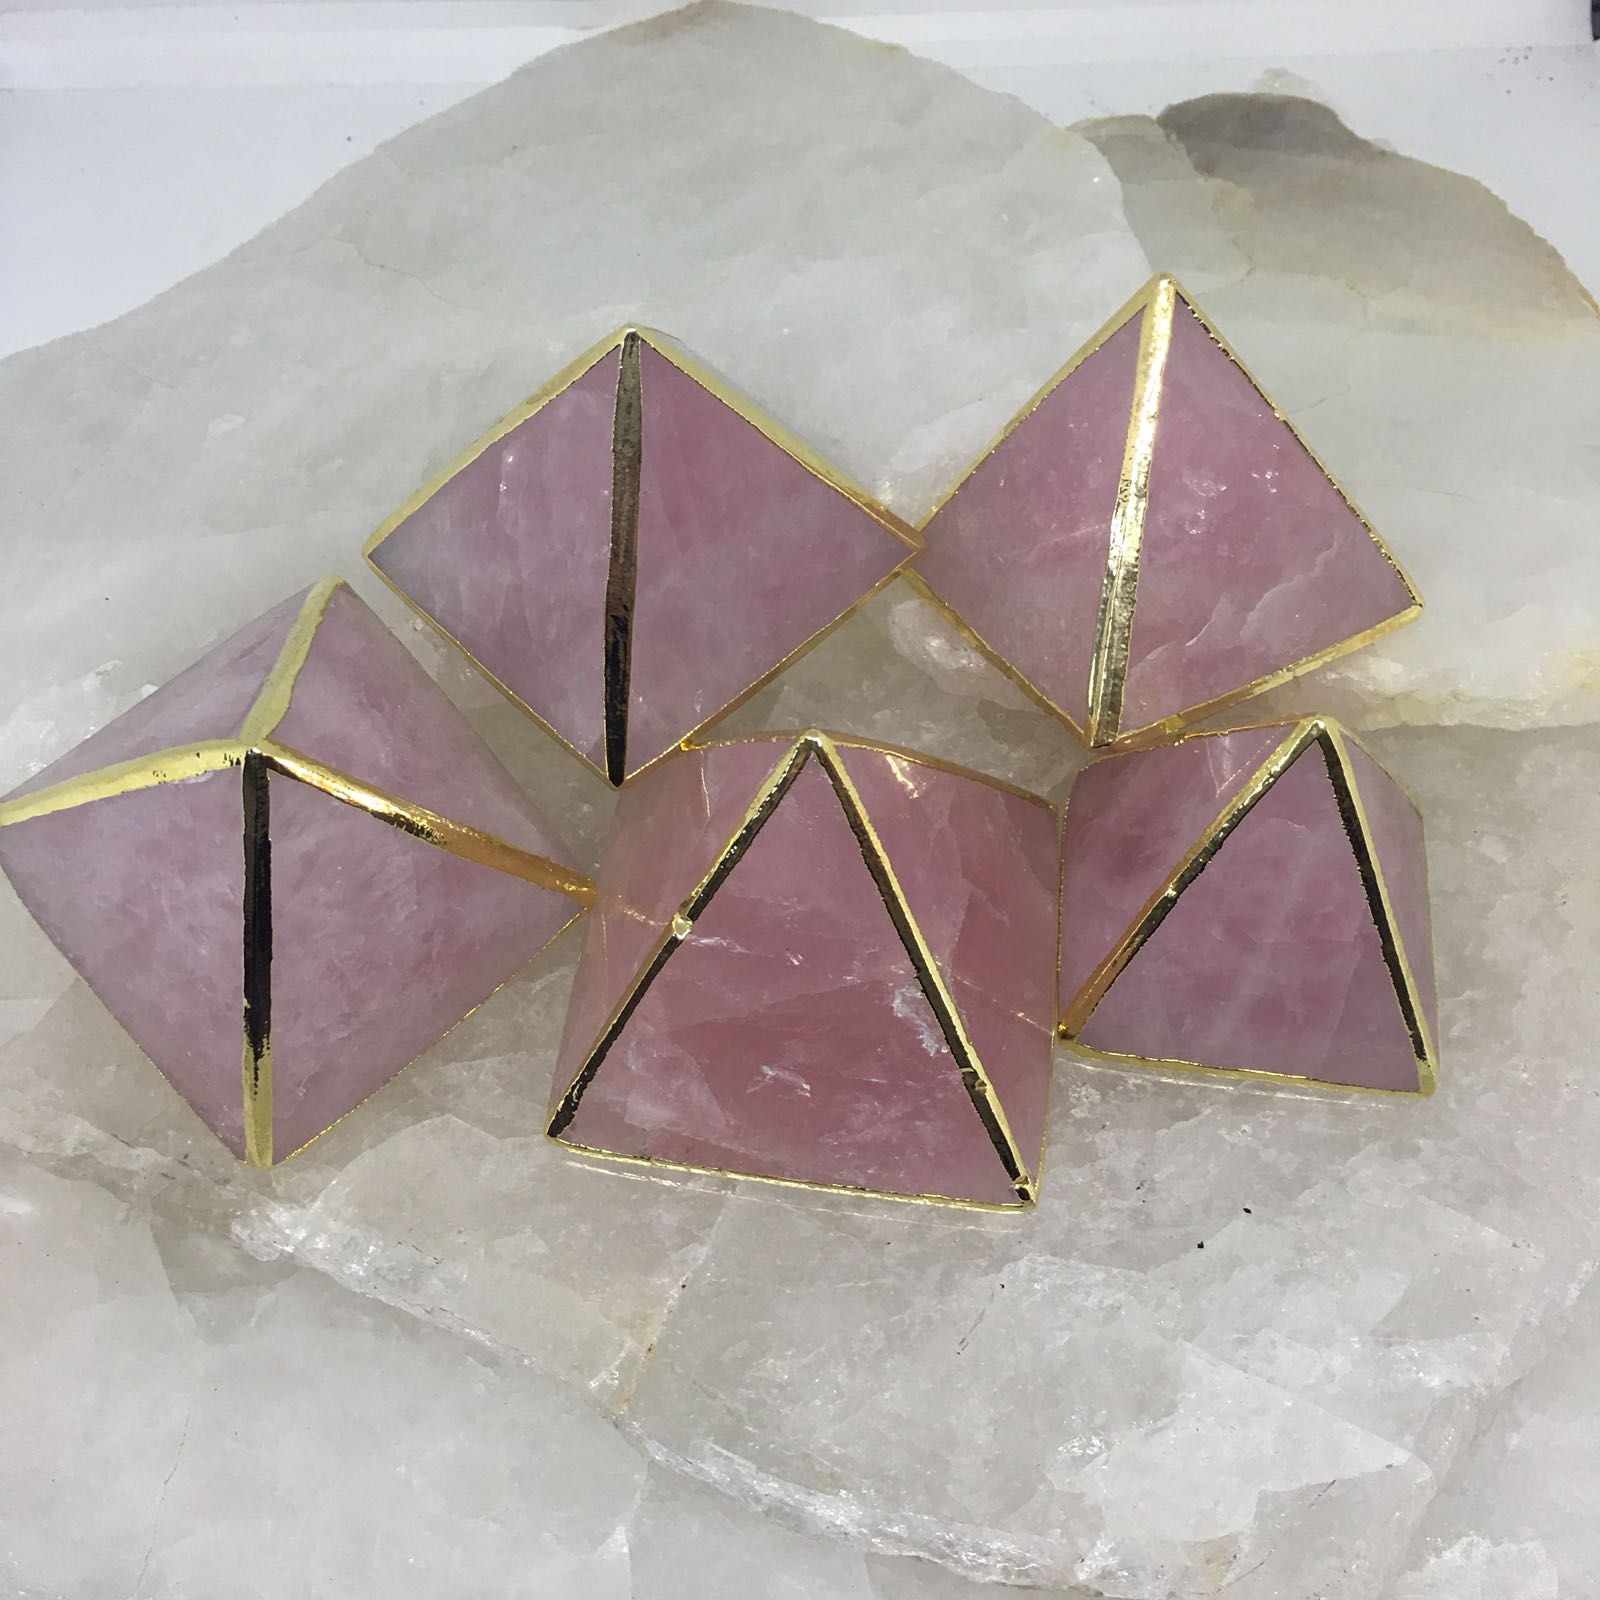 Stones from Uruguay - Gold Plated Rose Quartz Pyramid for Decor & Home